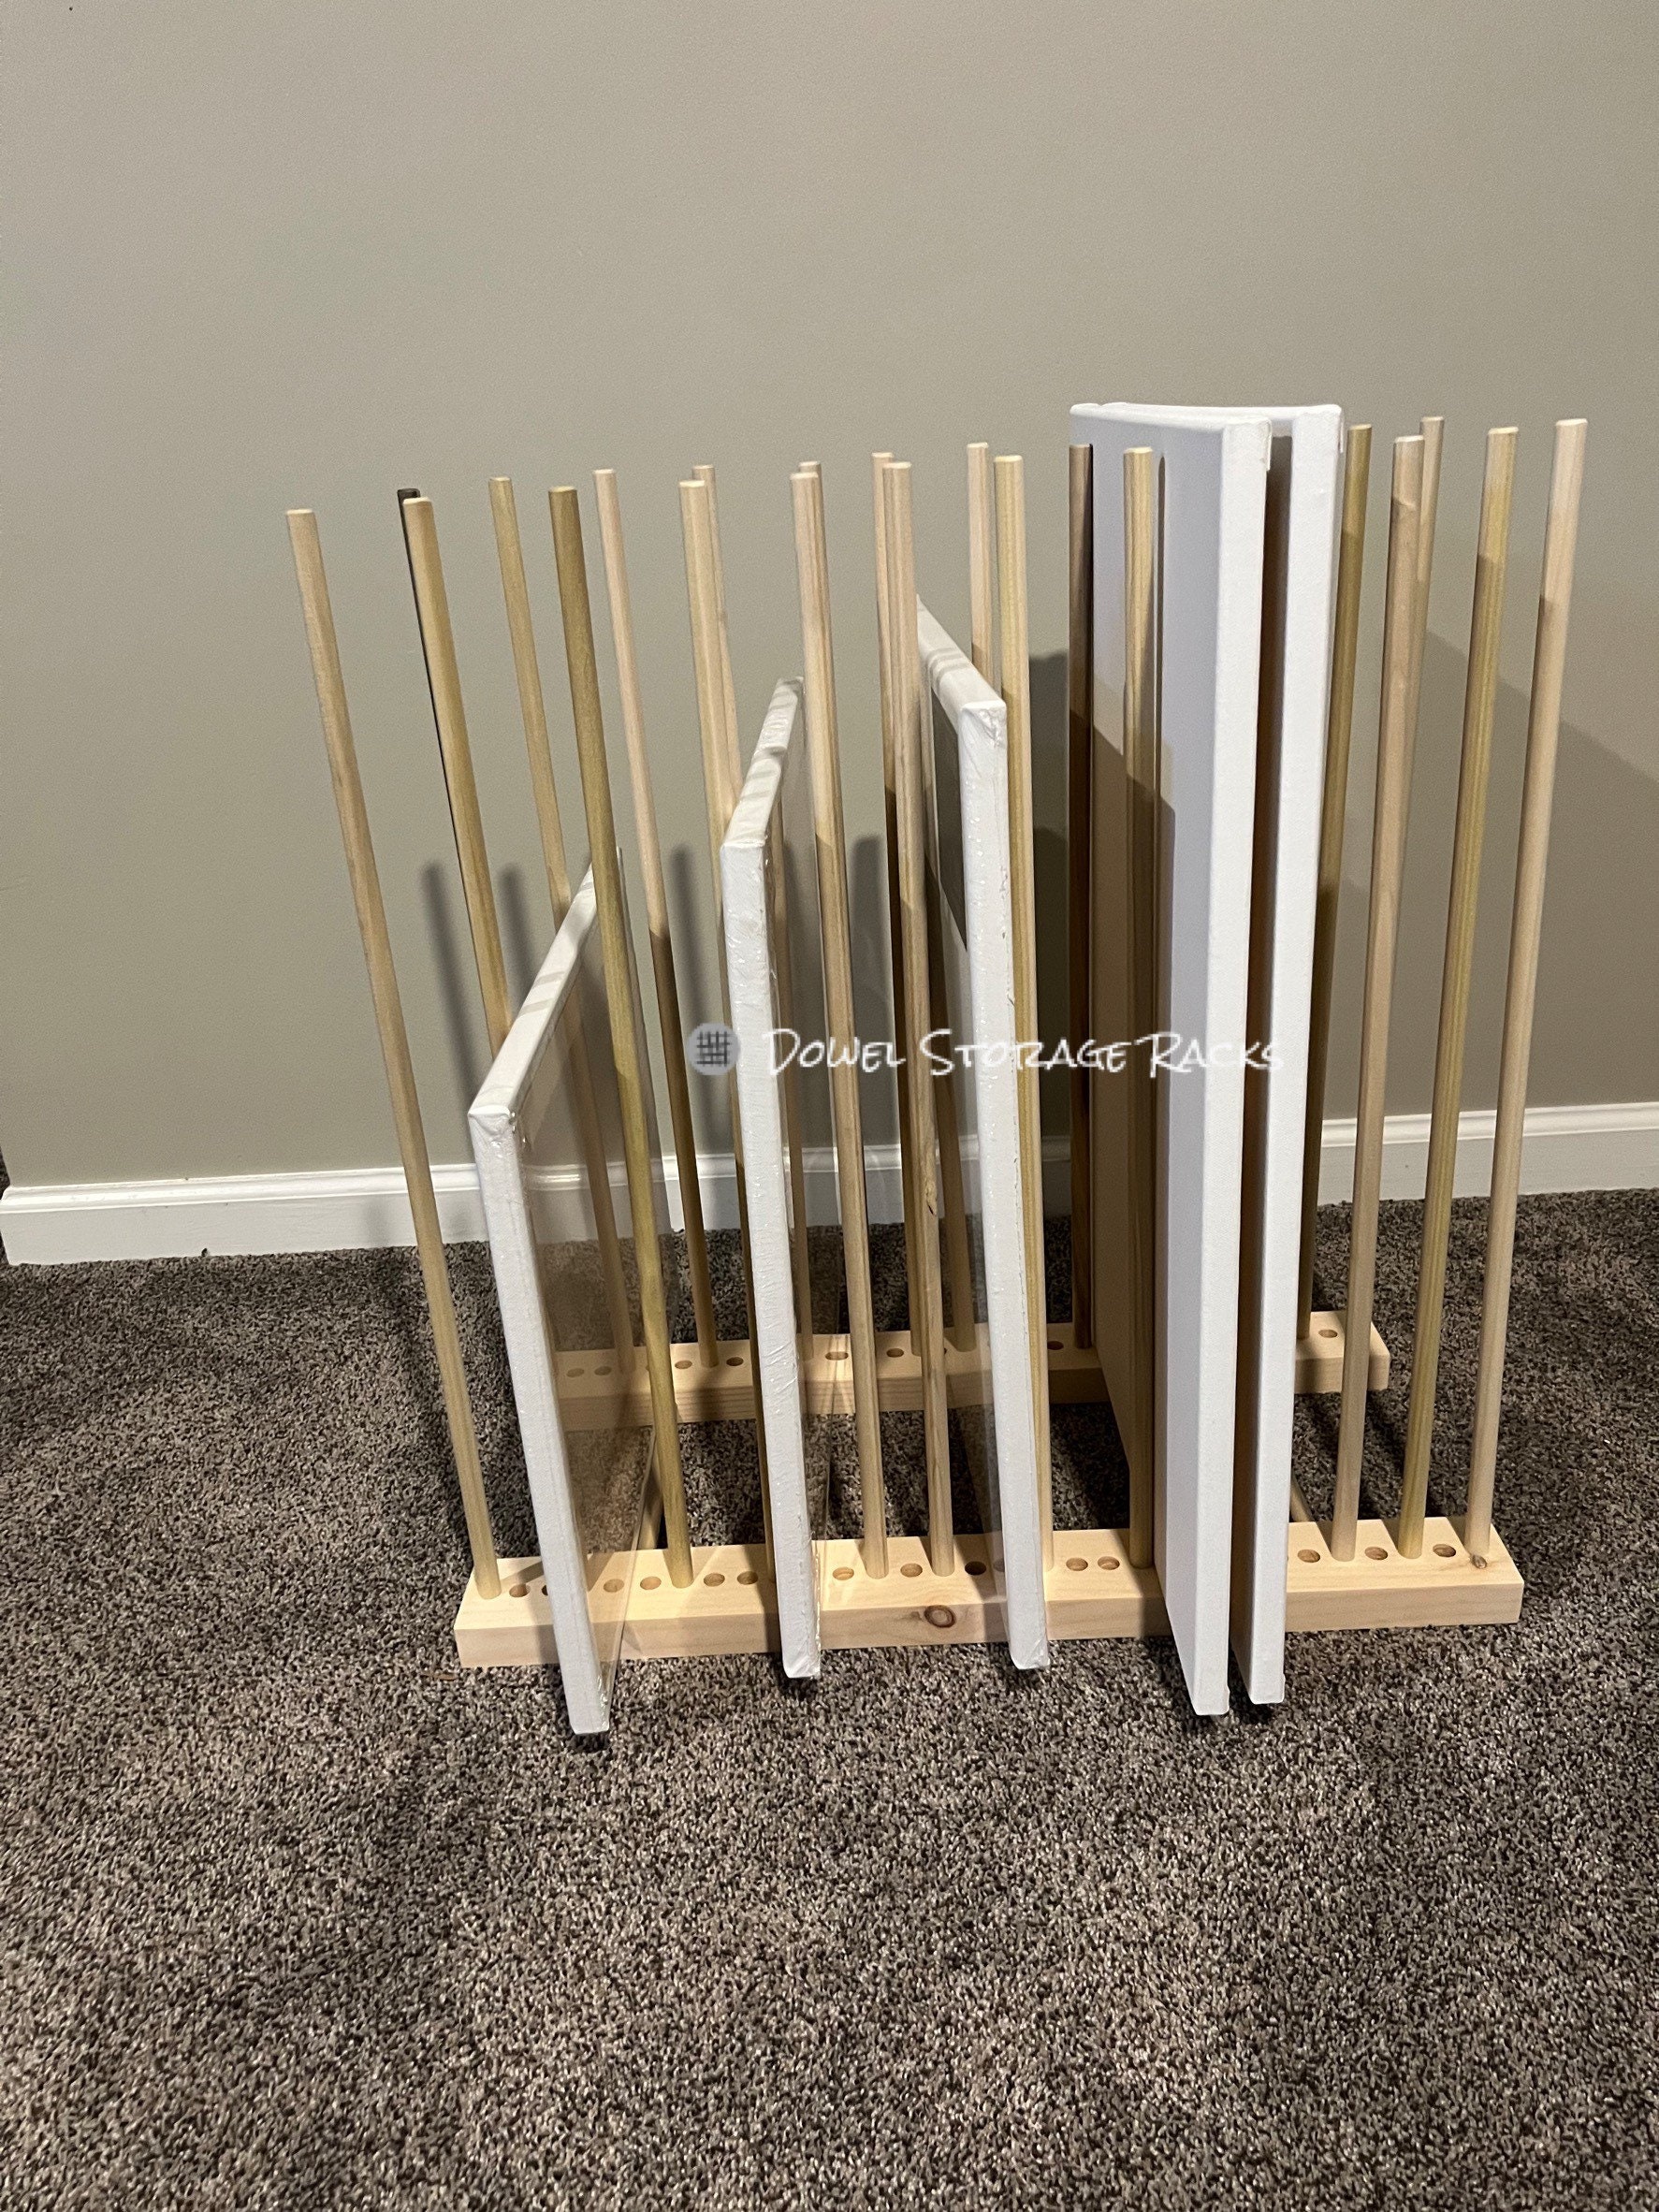 Buy Art Storage Rack 36 Long X 11 Wide With 24 Tall Dowels for